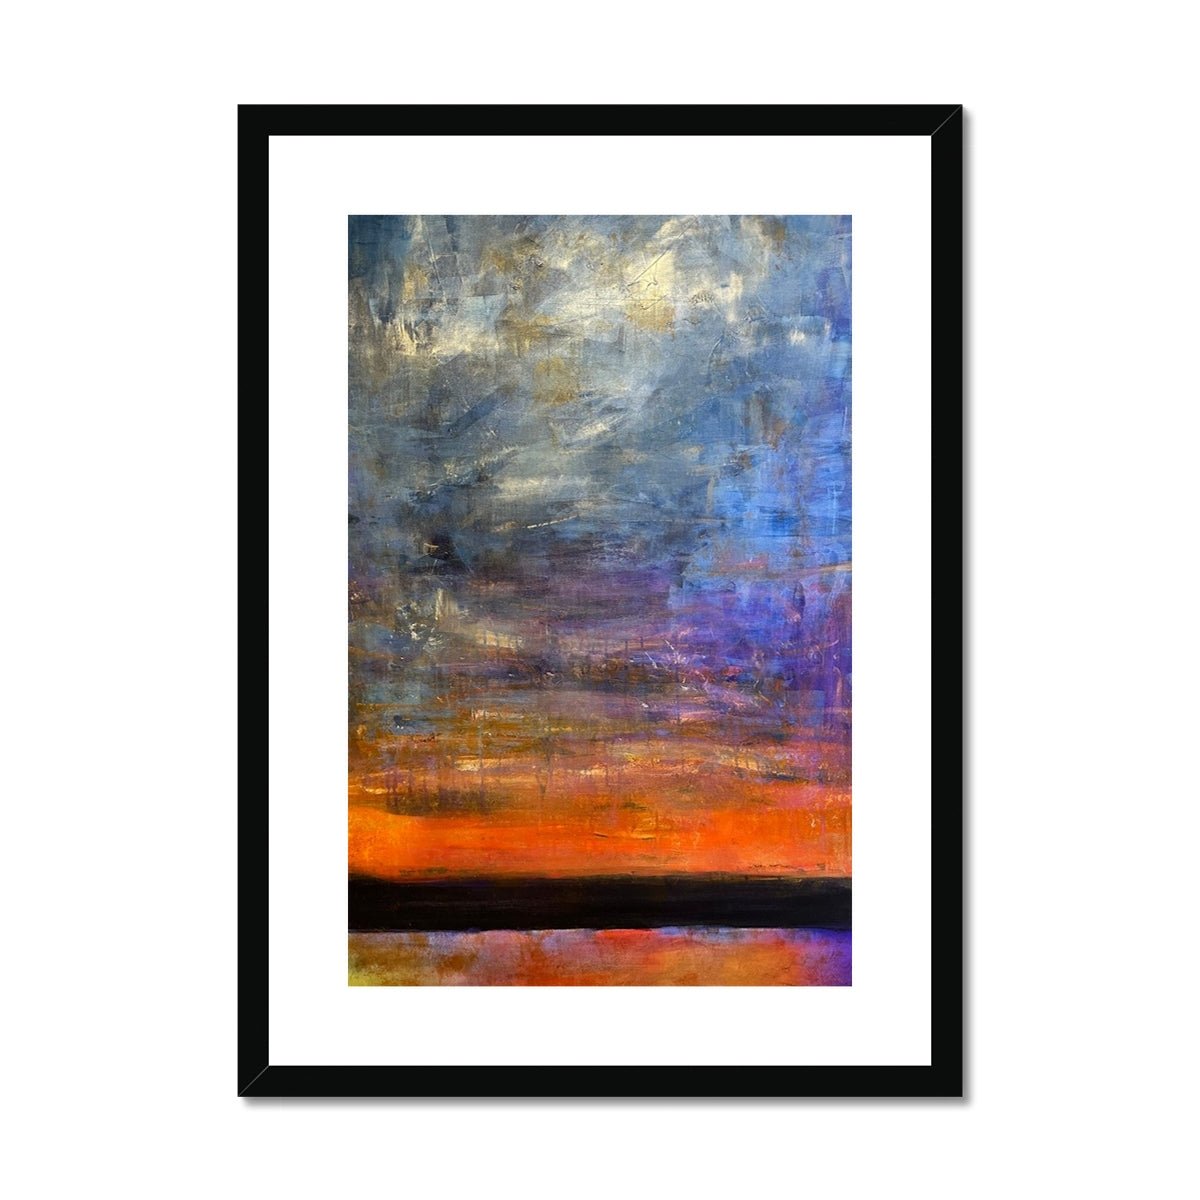 Horizon Dreams Abstract Painting | Framed & Mounted Prints From Scotland-Framed & Mounted Prints-Abstract & Impressionistic Art Gallery-A2 Portrait-Black Frame-Paintings, Prints, Homeware, Art Gifts From Scotland By Scottish Artist Kevin Hunter